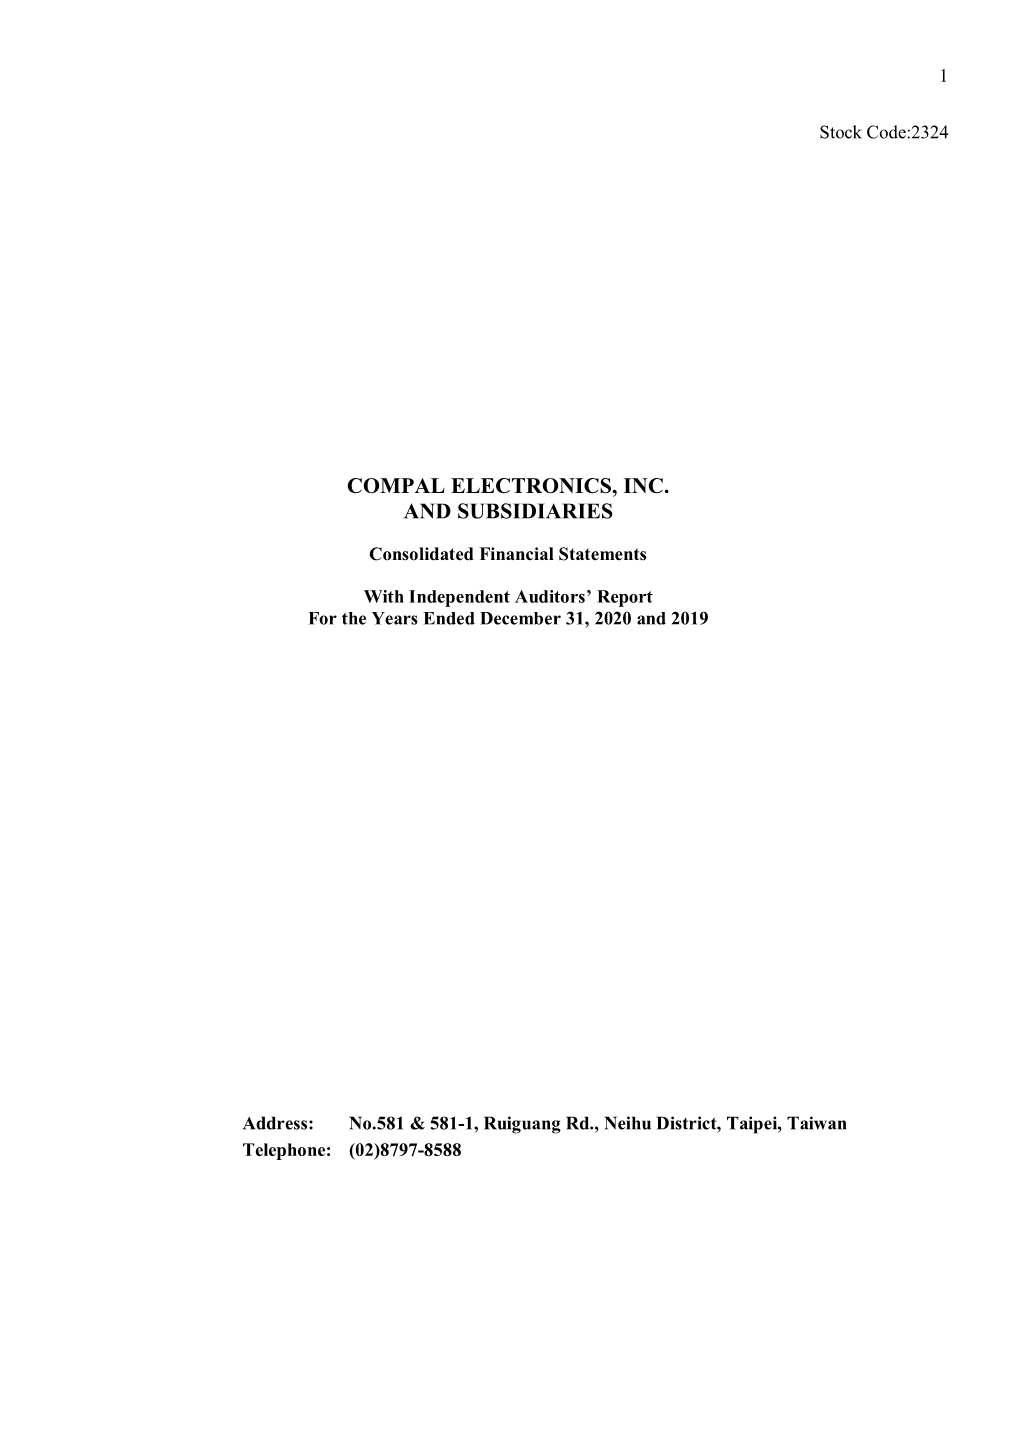 Compal Electronics, Inc. and Subsidiaries